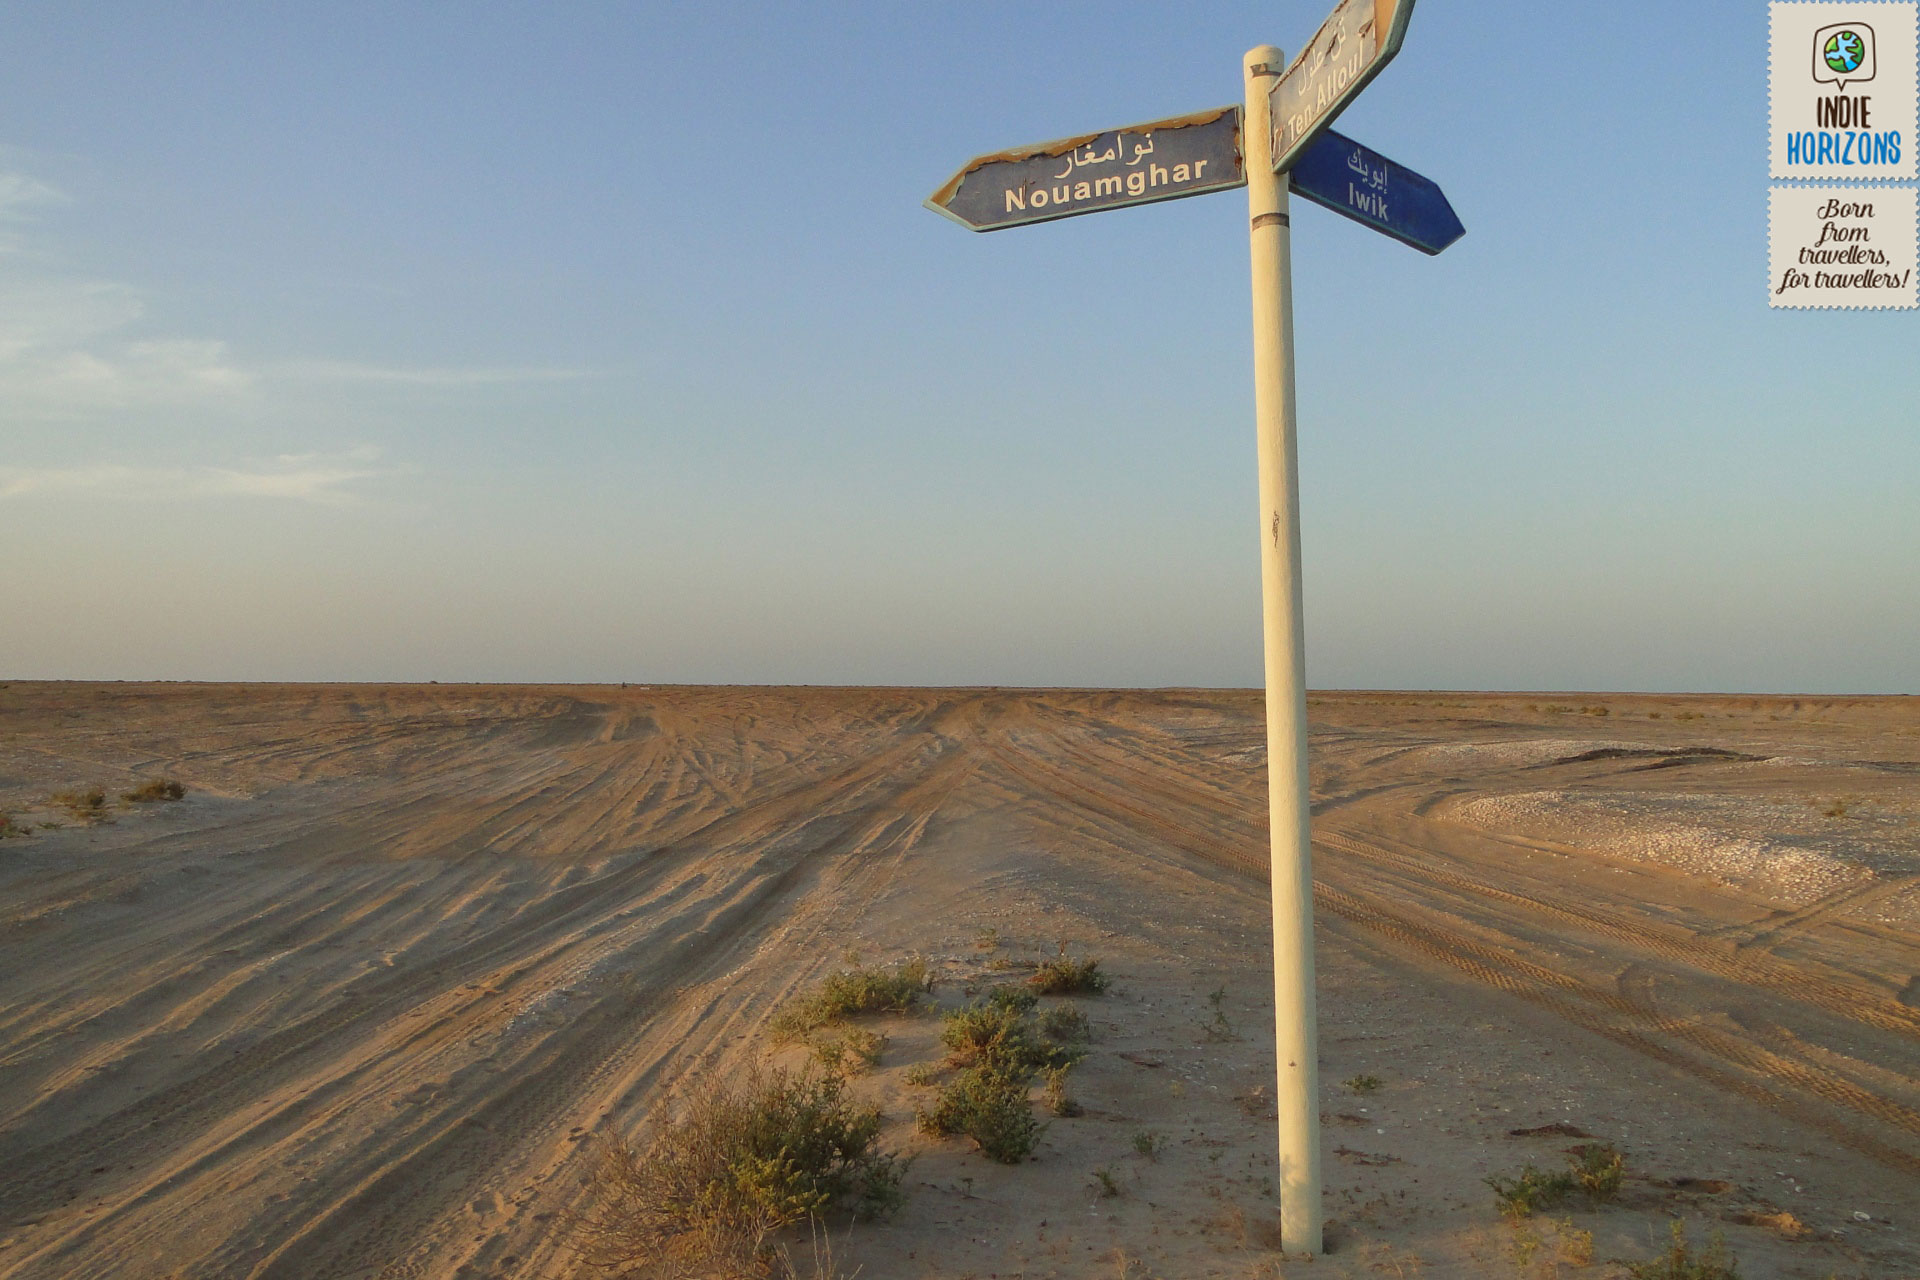 46. Mauritania, sign in the middle of the desert, Banc d'Arguin National Park